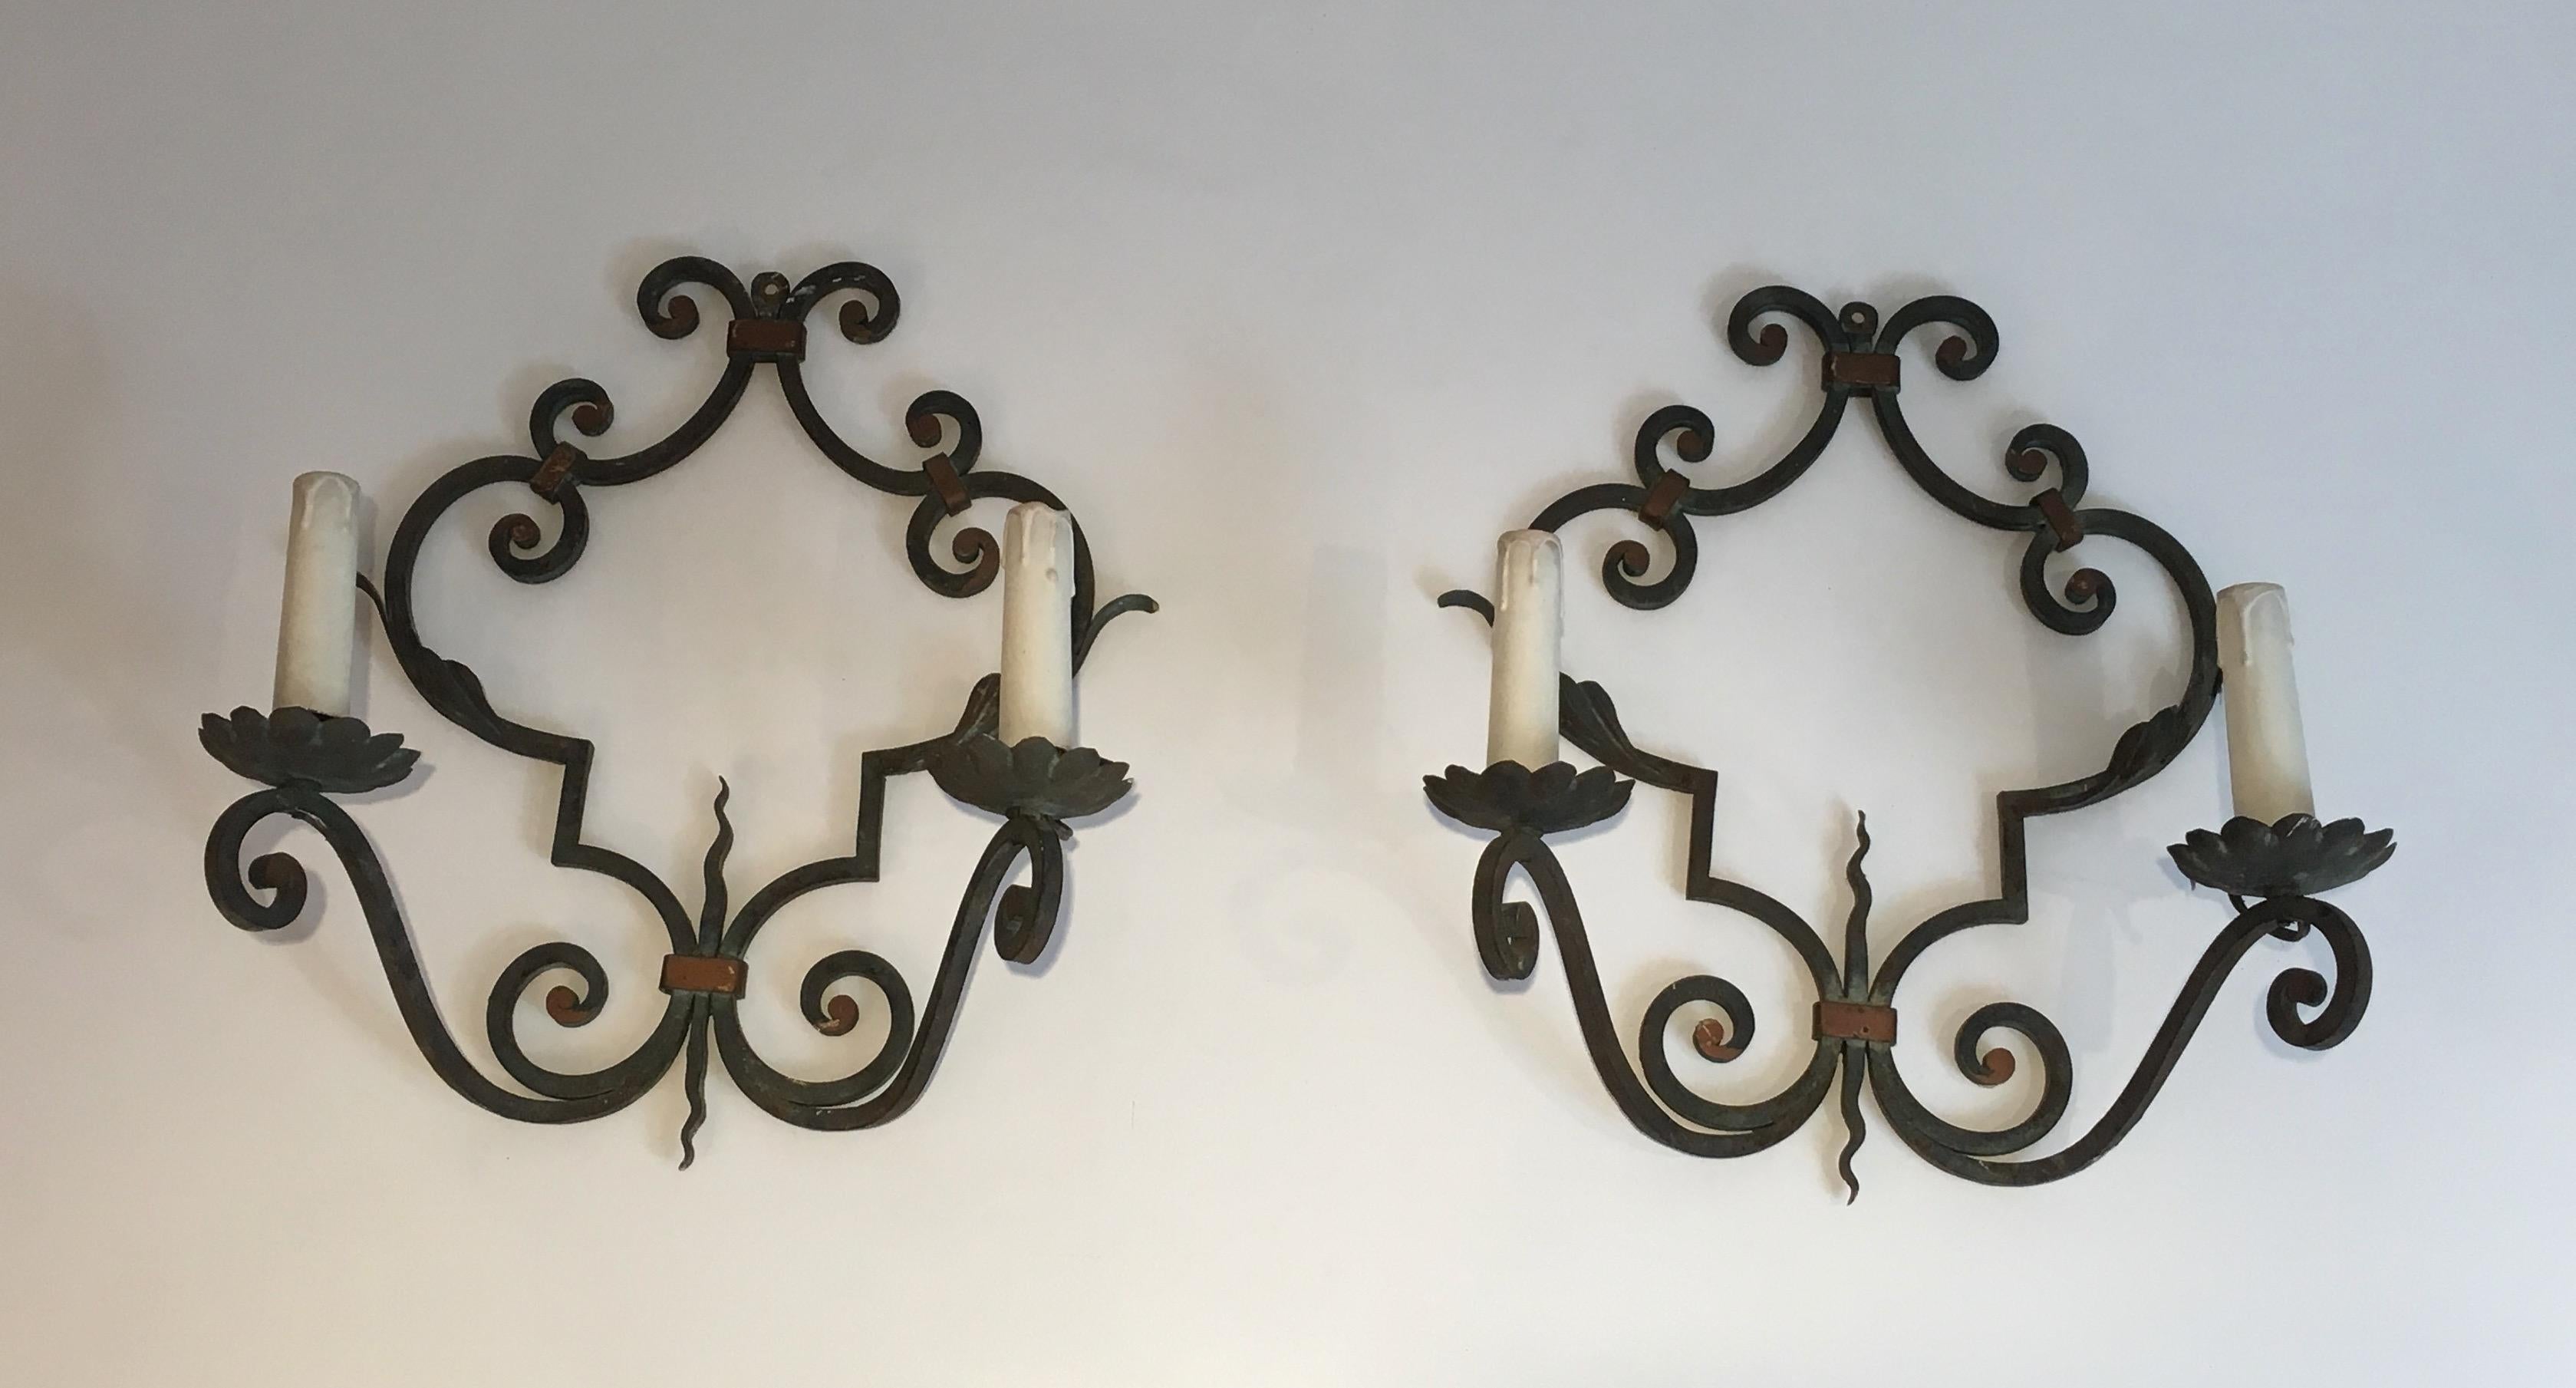 This large and decorative pair of wall sconces is made of wrought iron. This is a French work, circa 1950.